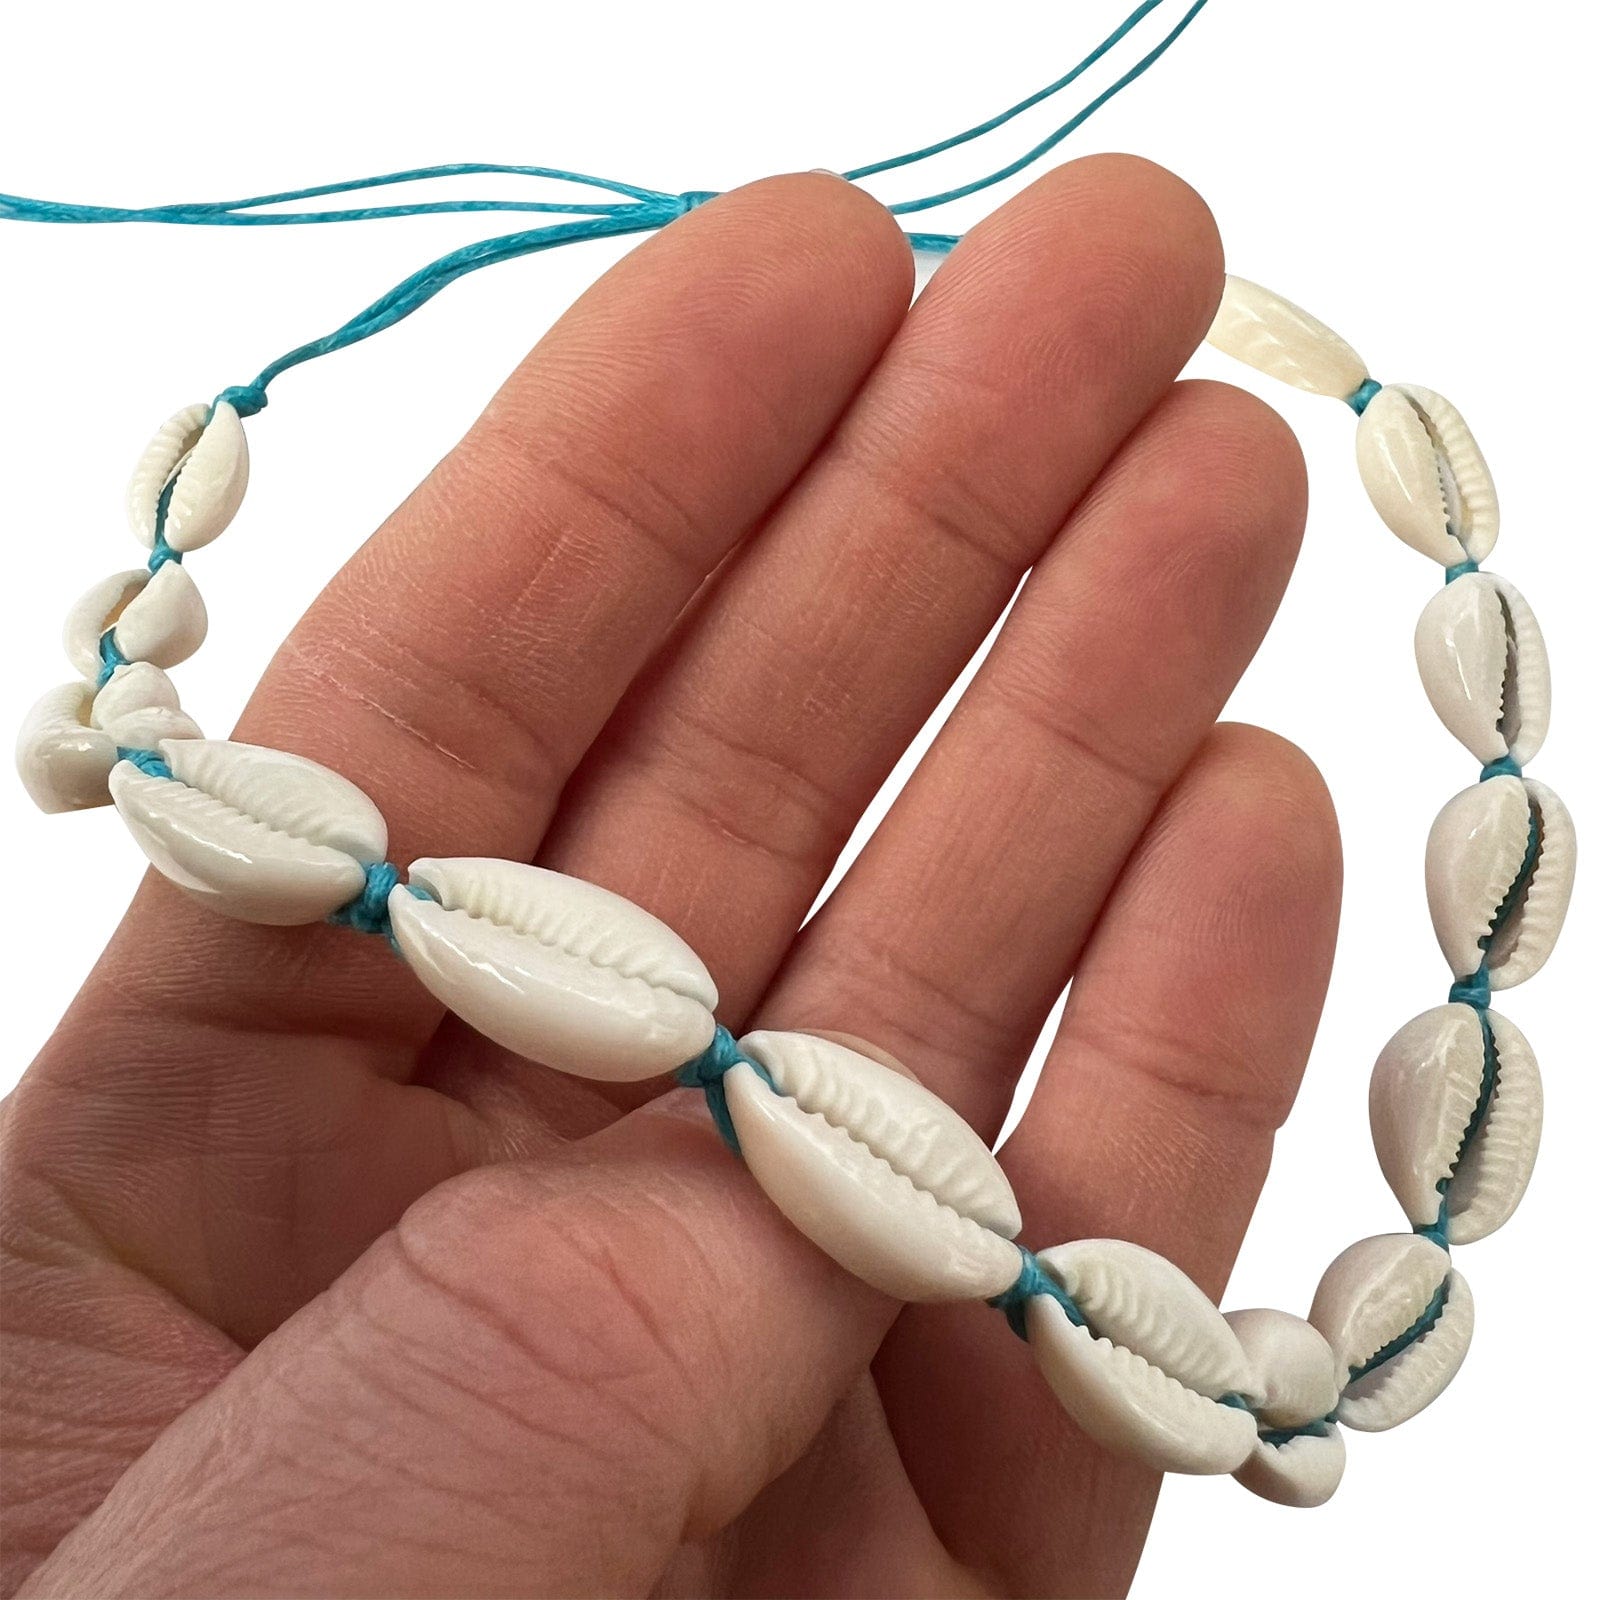 Sea Shell Necklace Choker Turquoise Cord Chain Womens Mens Girls Boys Jewellery